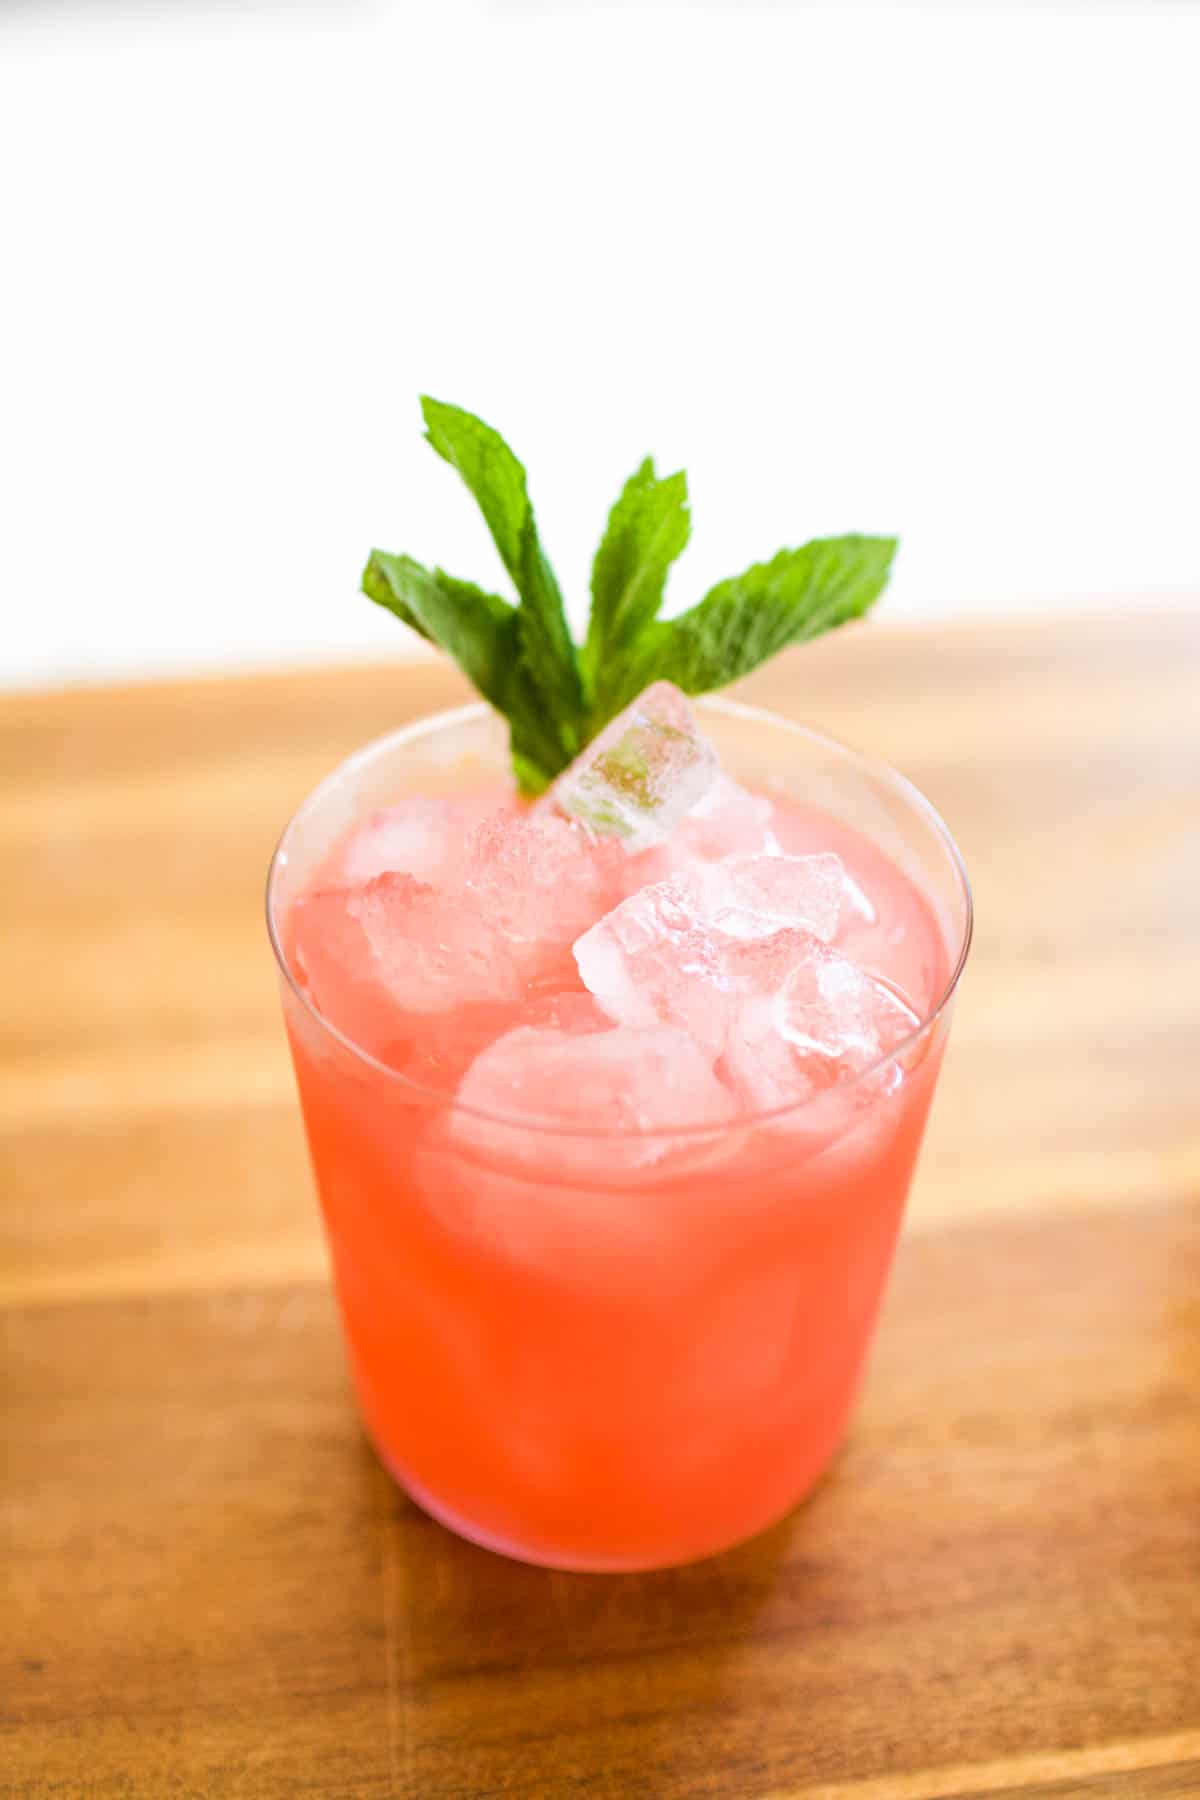 A pink drink with mint garnish on a cutting board.